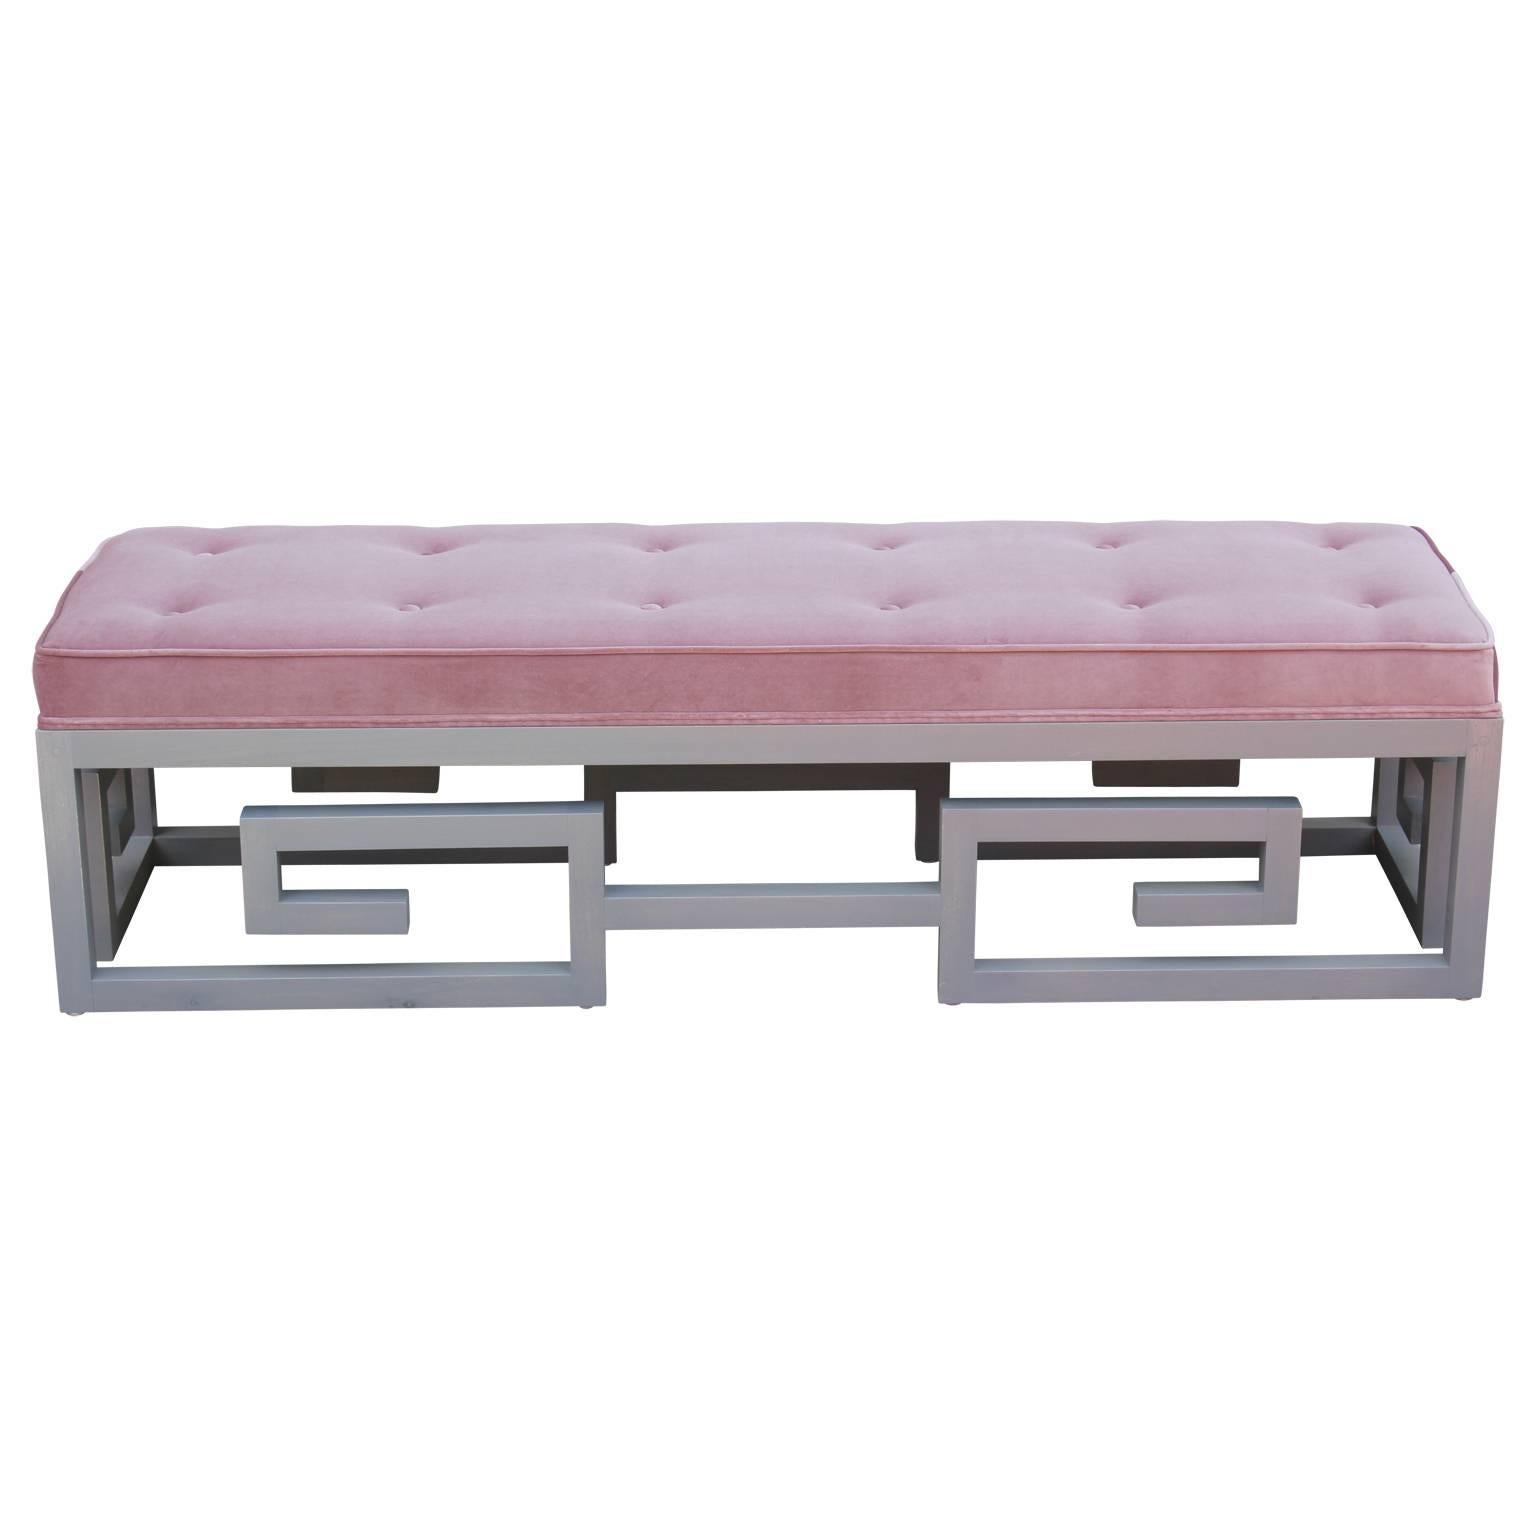 Unique Greek key bench custom-made in gray and purple velvet in the style of Baker Furniture Company or Kittinger. We also have another one available in a yellow velvet. Inquire for COM.